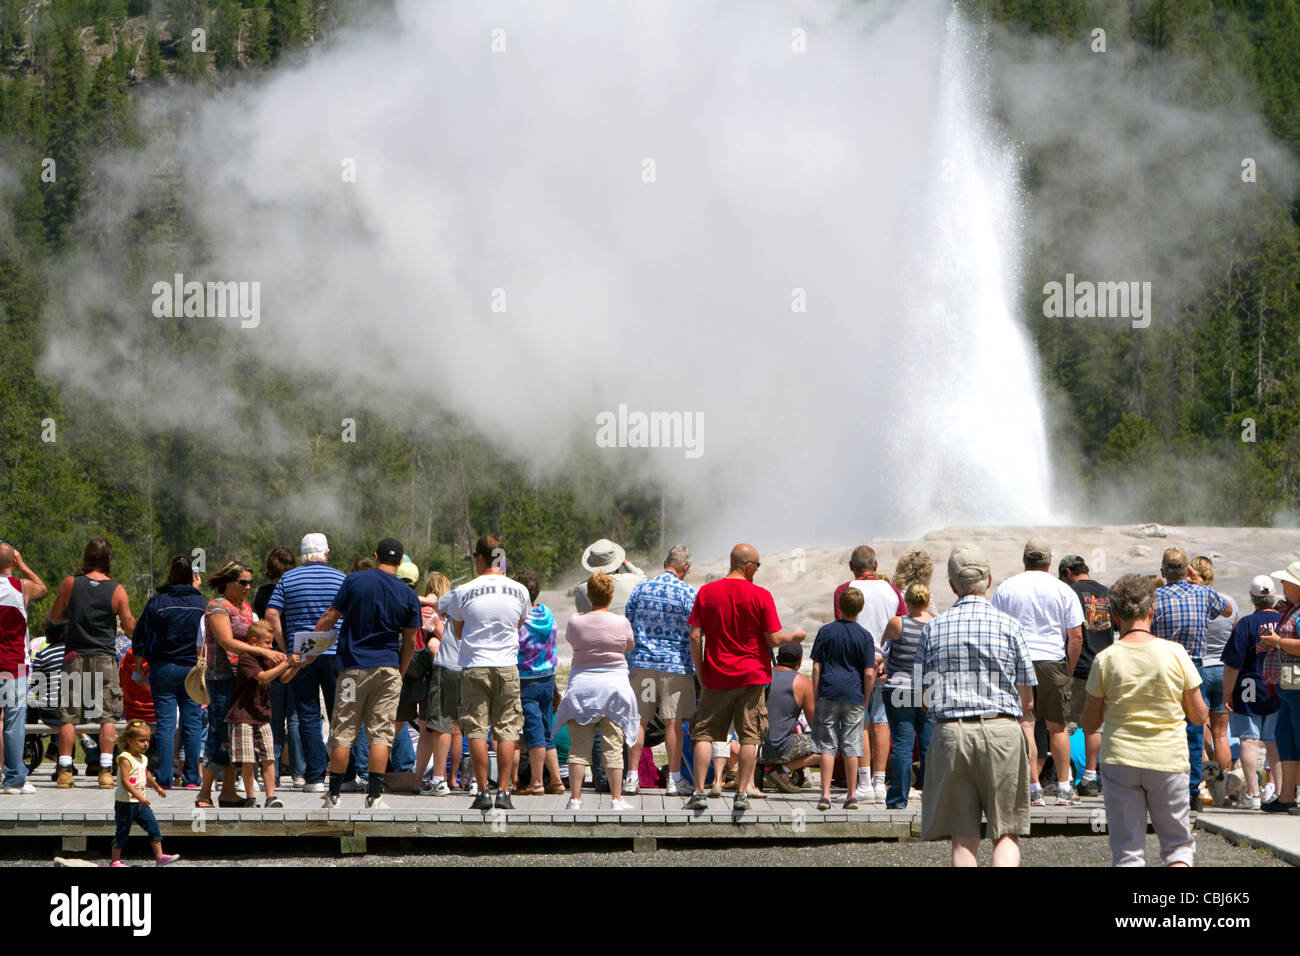 Tourists gather to watch the Old Faithful geyser eruption in Yellowstone National Park, USA. Stock Photo